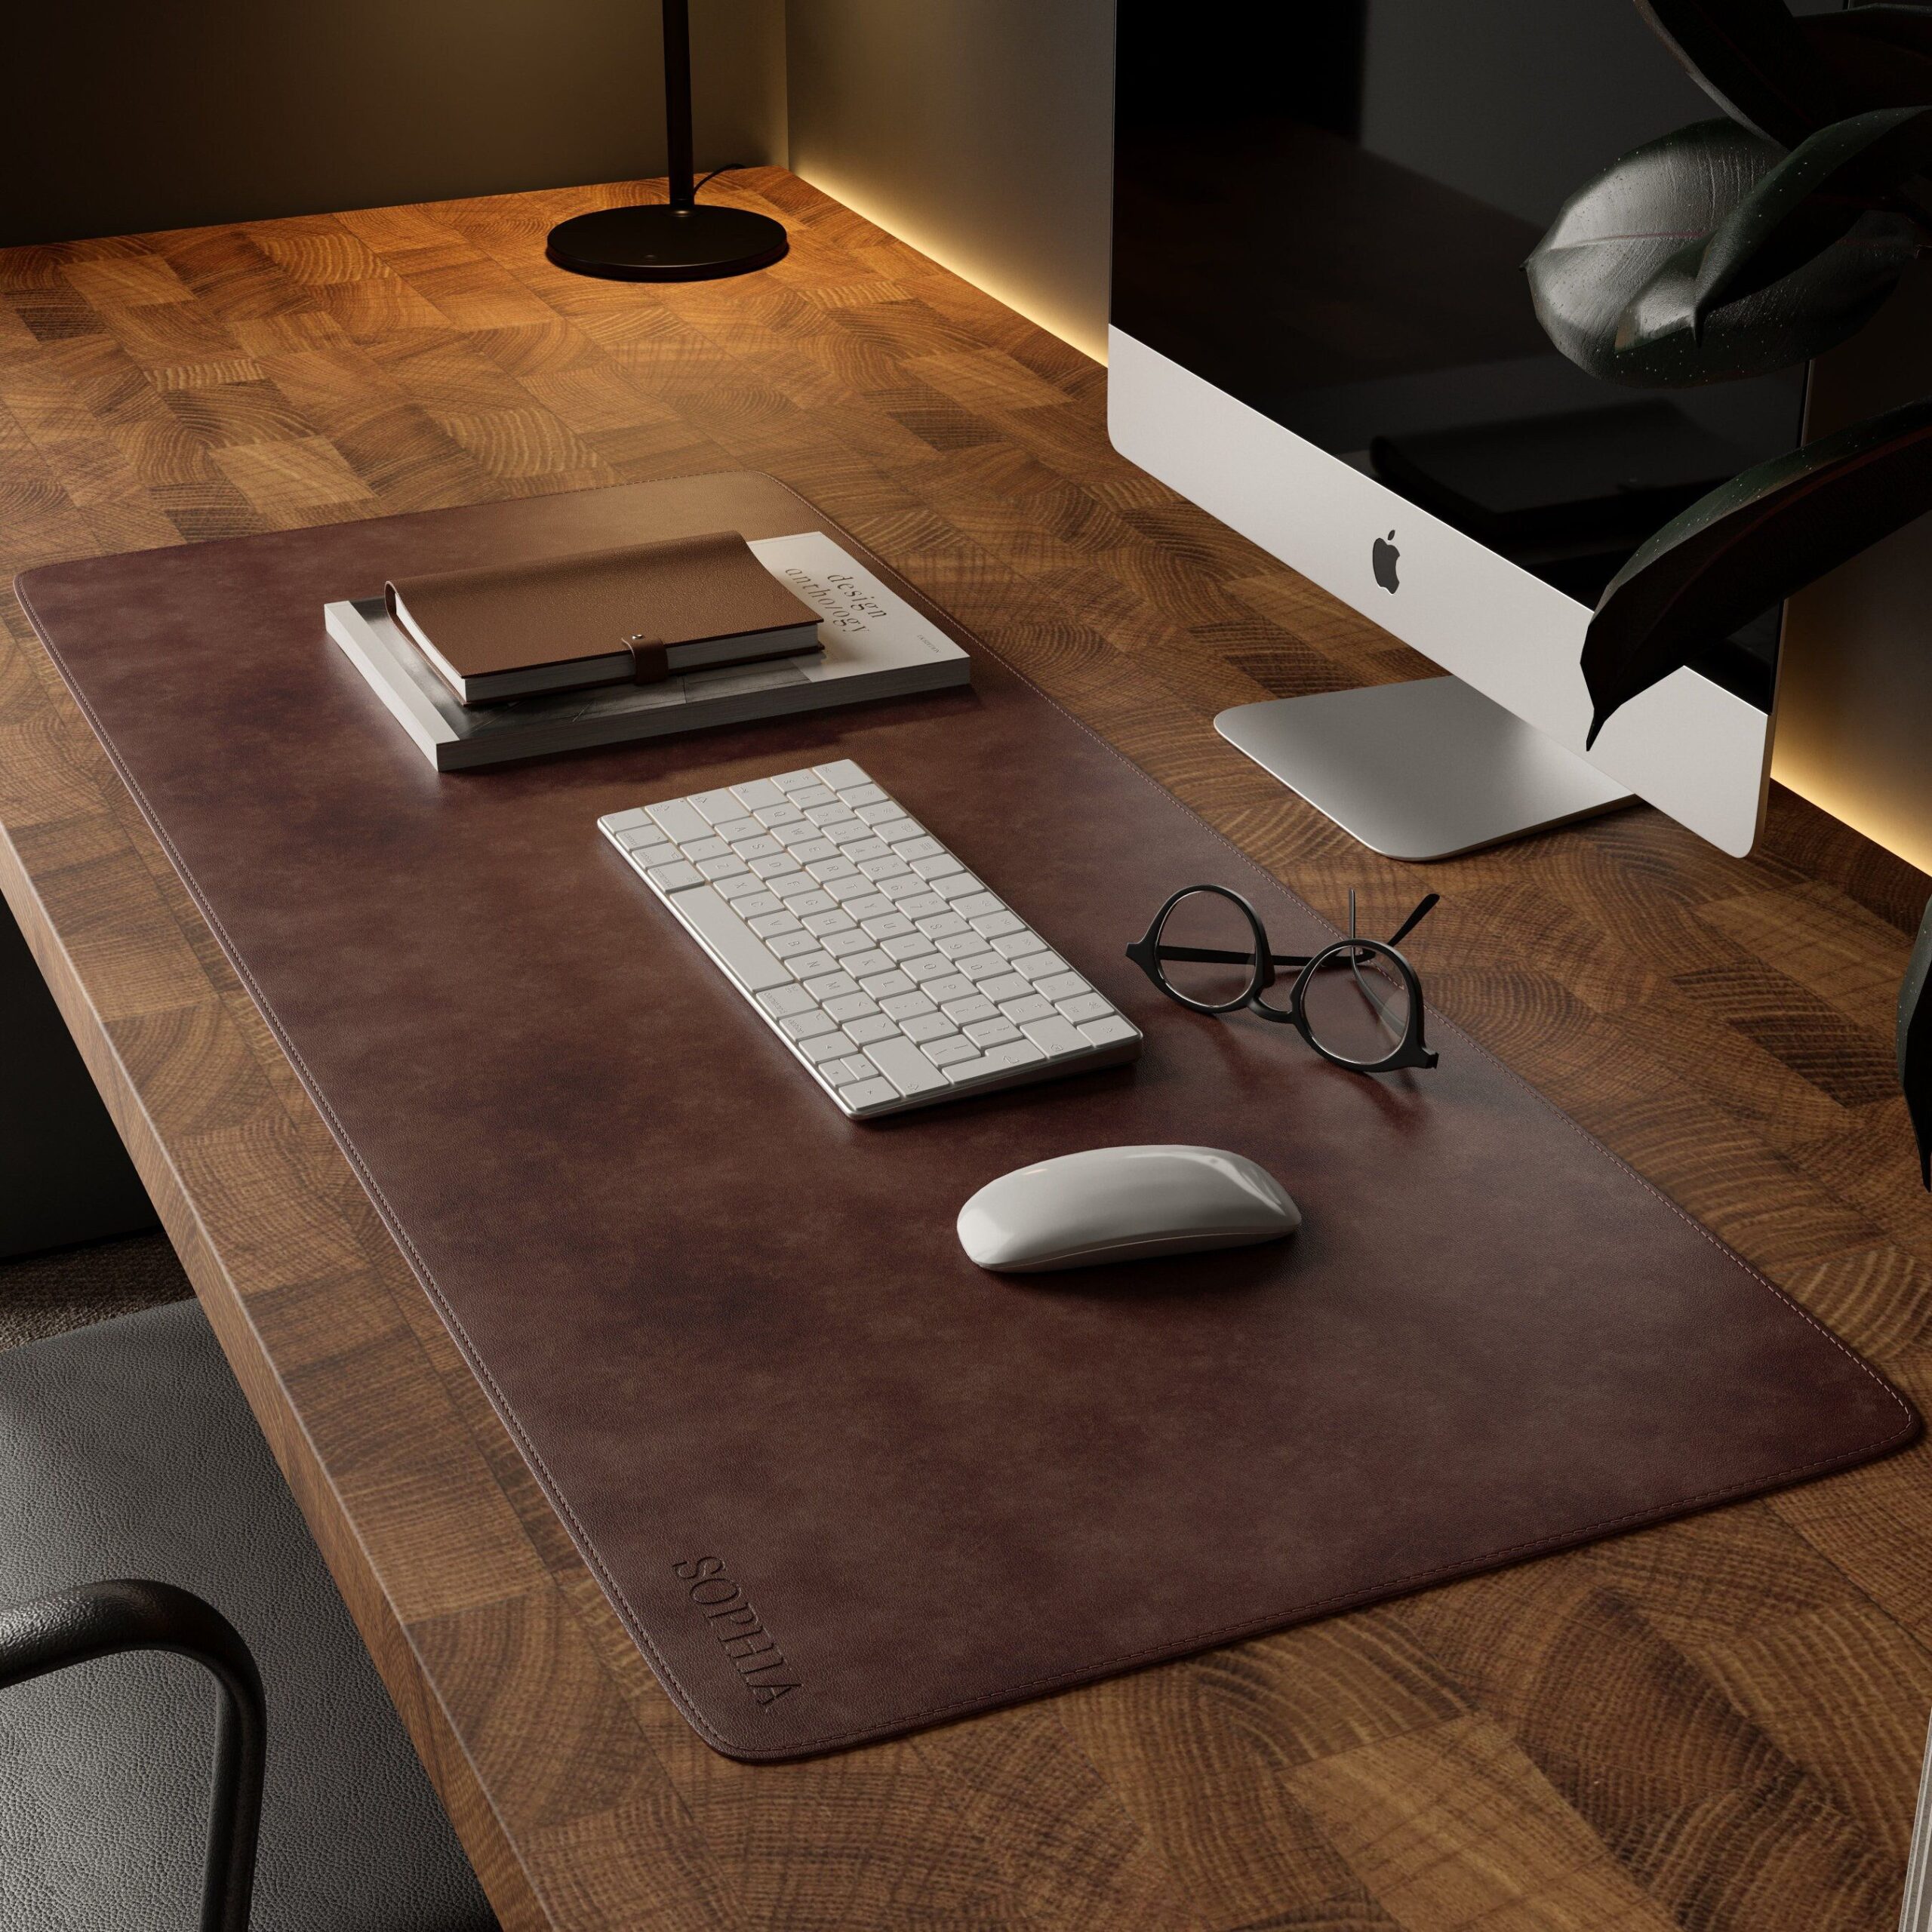 Enhance Your Workspace with Stylish Desk Accessories